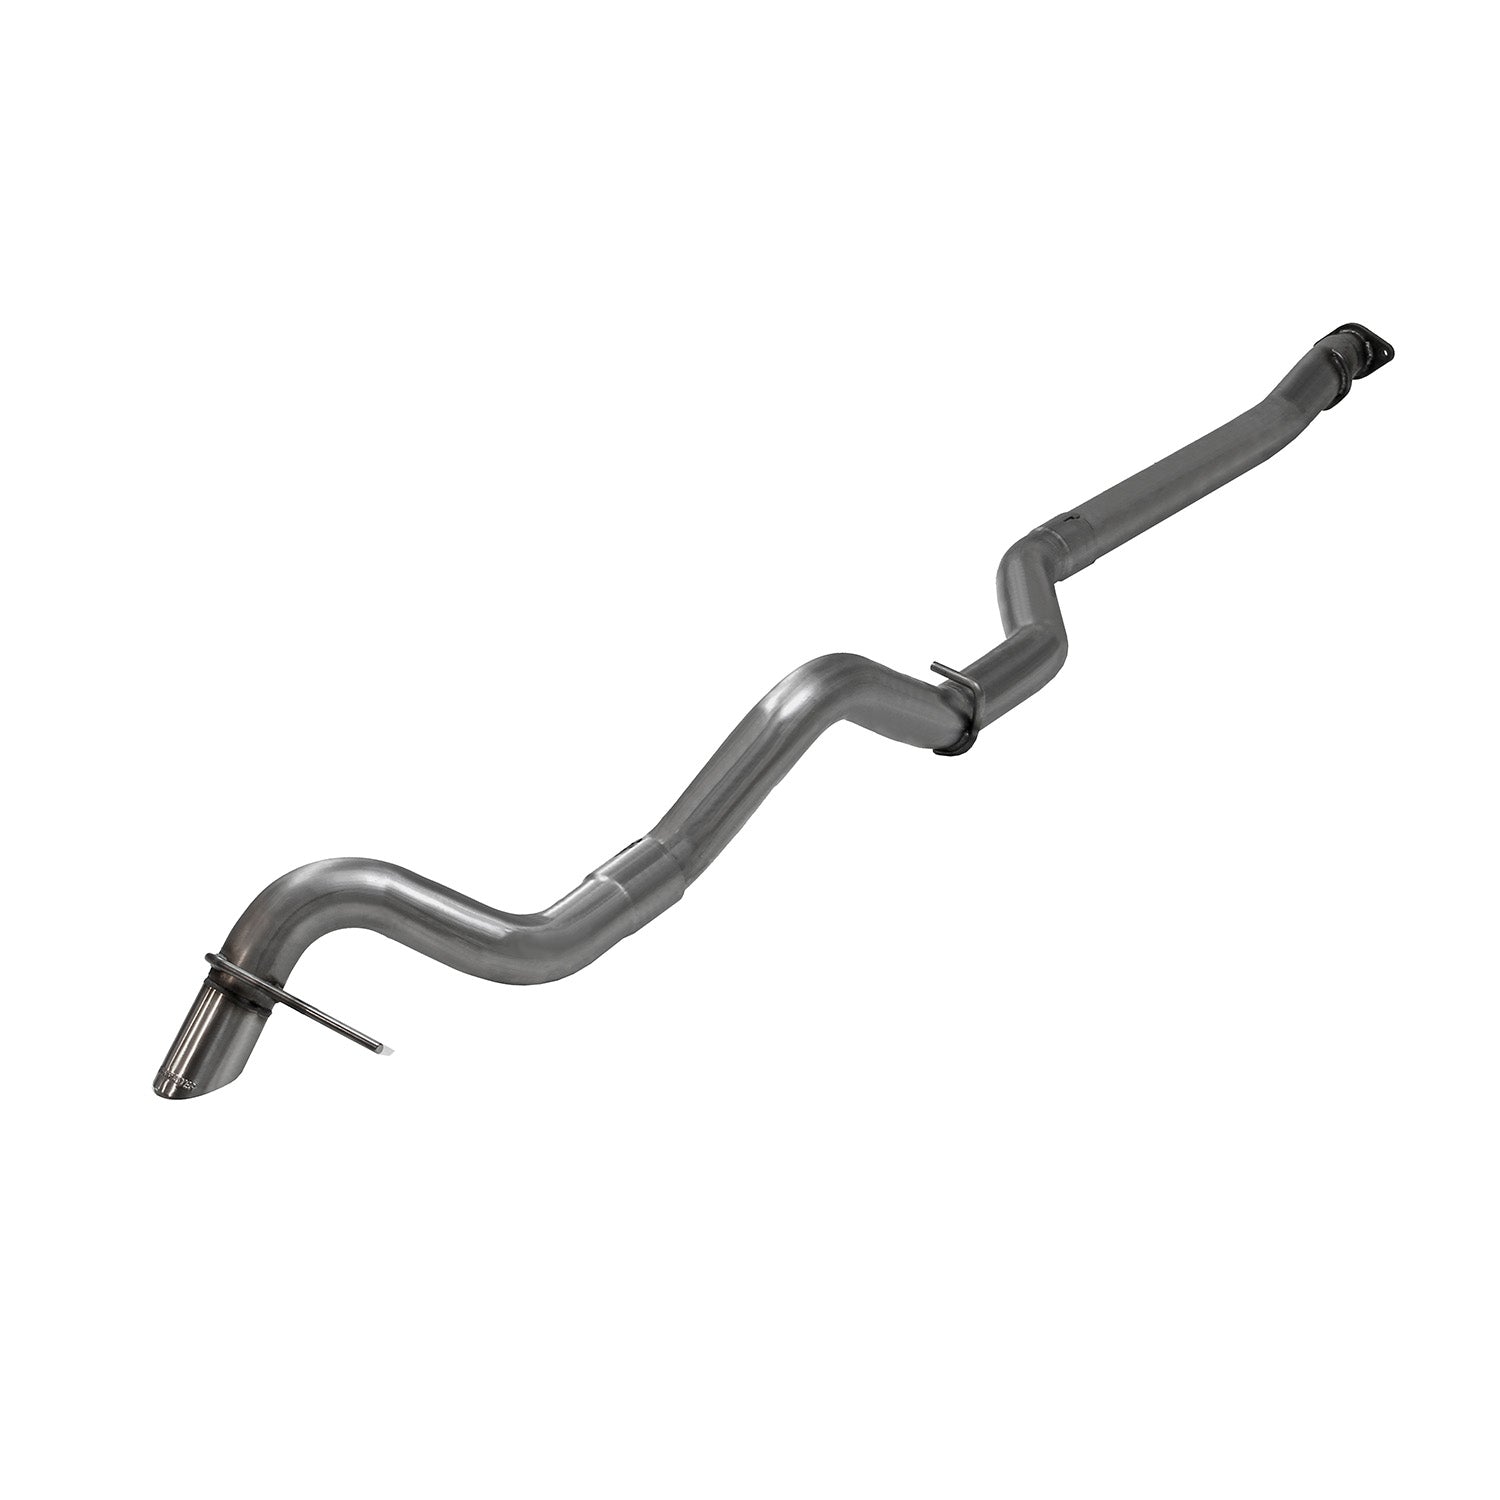 Flowmaster 21-23 Ford Bronco (2.3, 2.7) Exhaust System Kit 818124